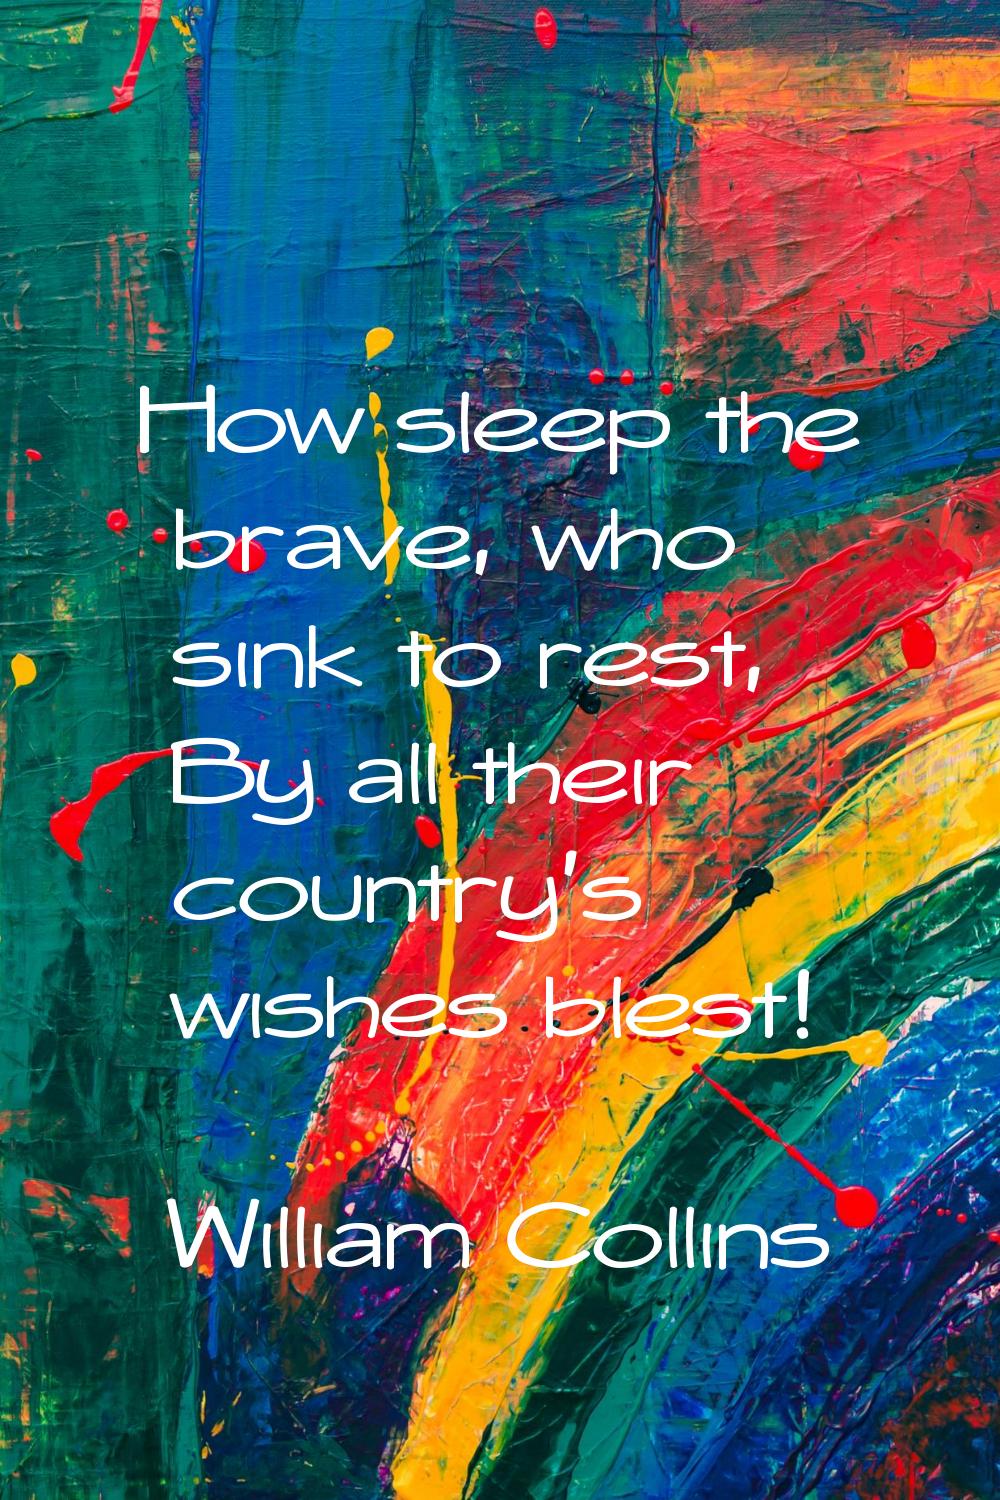 How sleep the brave, who sink to rest, By all their country's wishes blest!